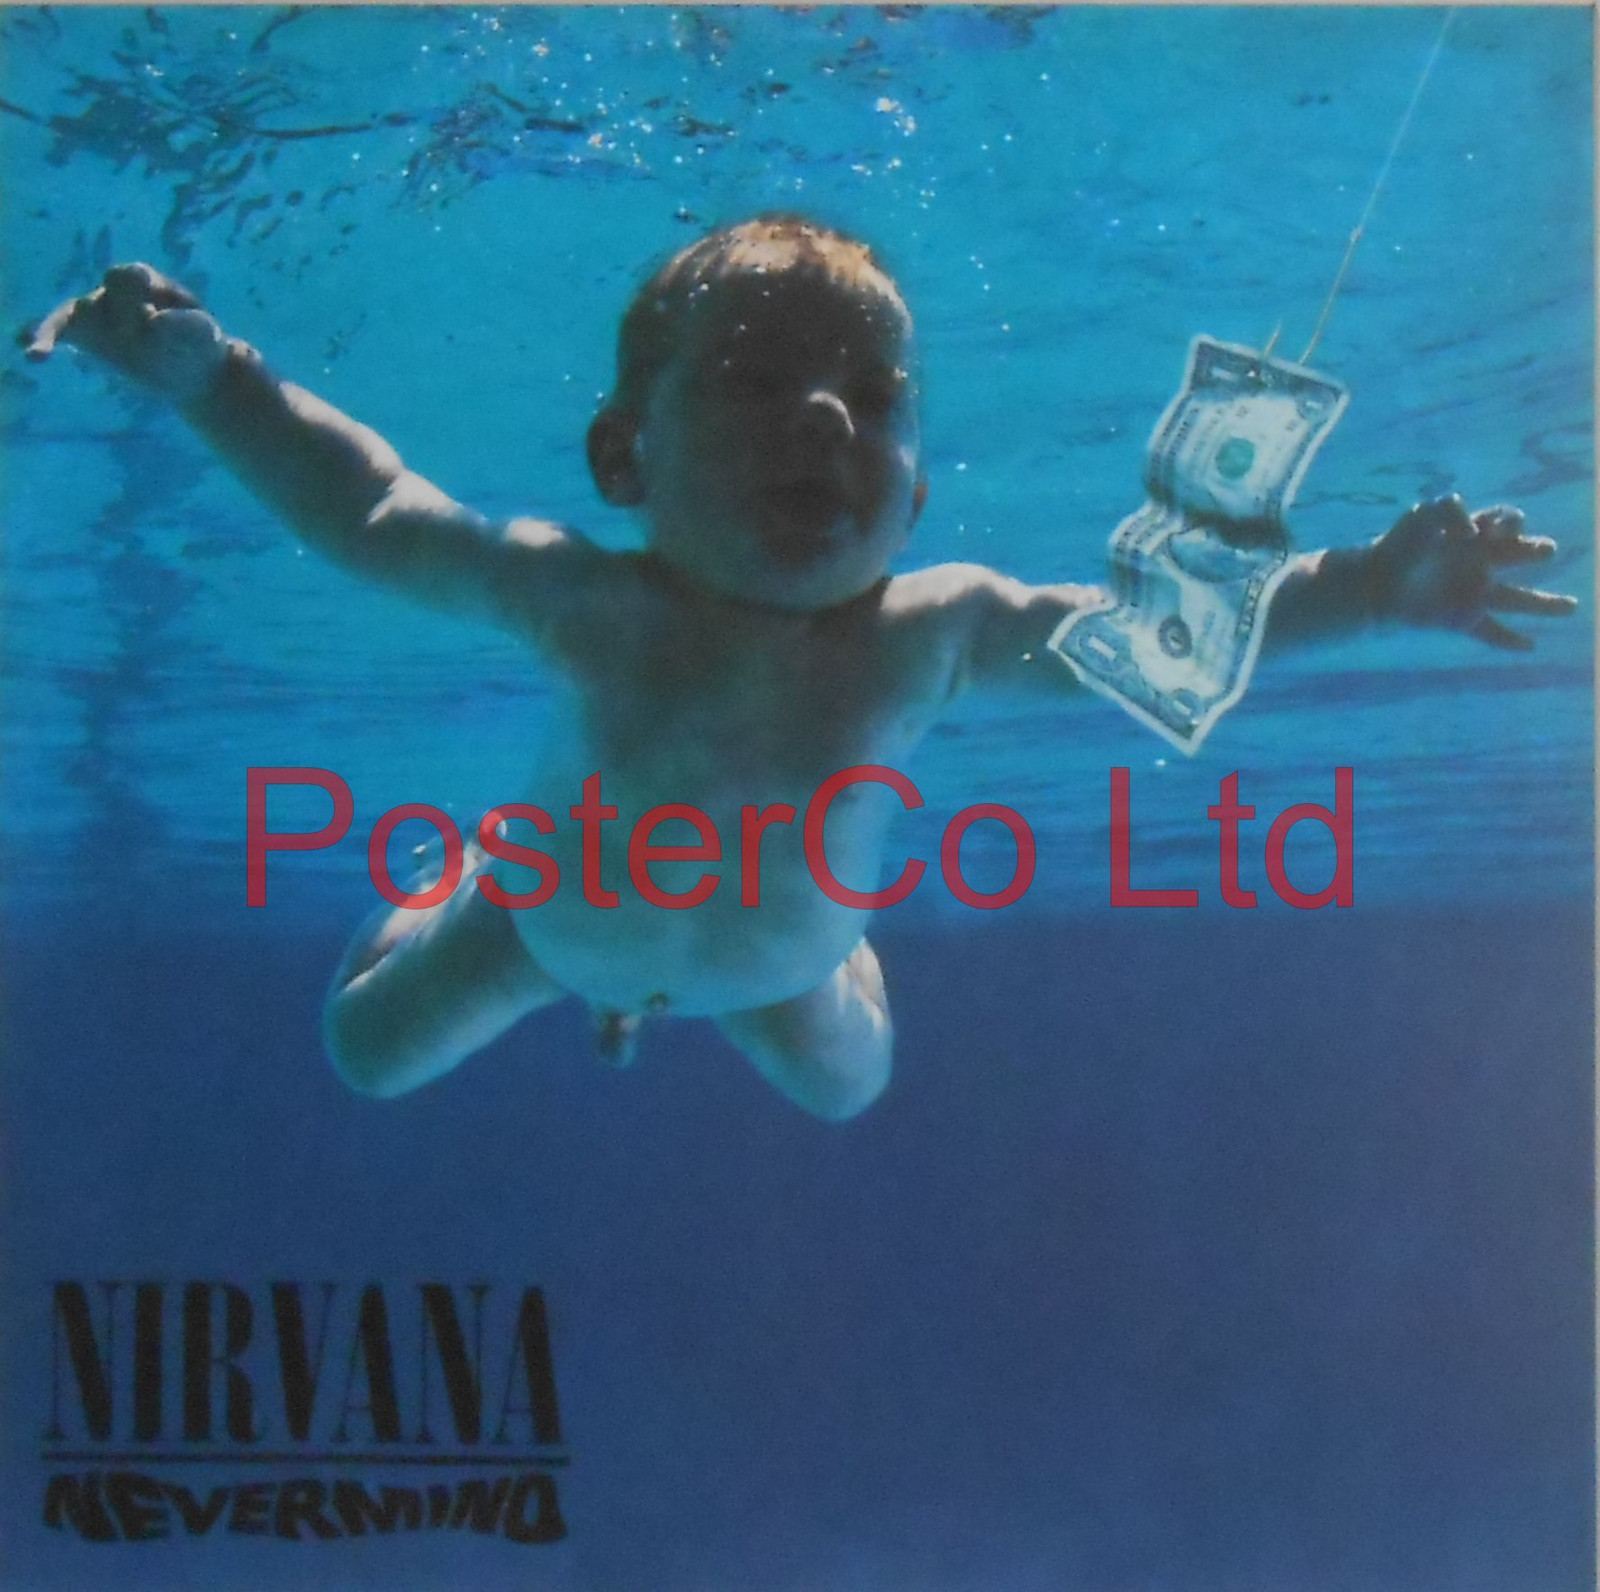 nirvana nevermind cover bedeutung